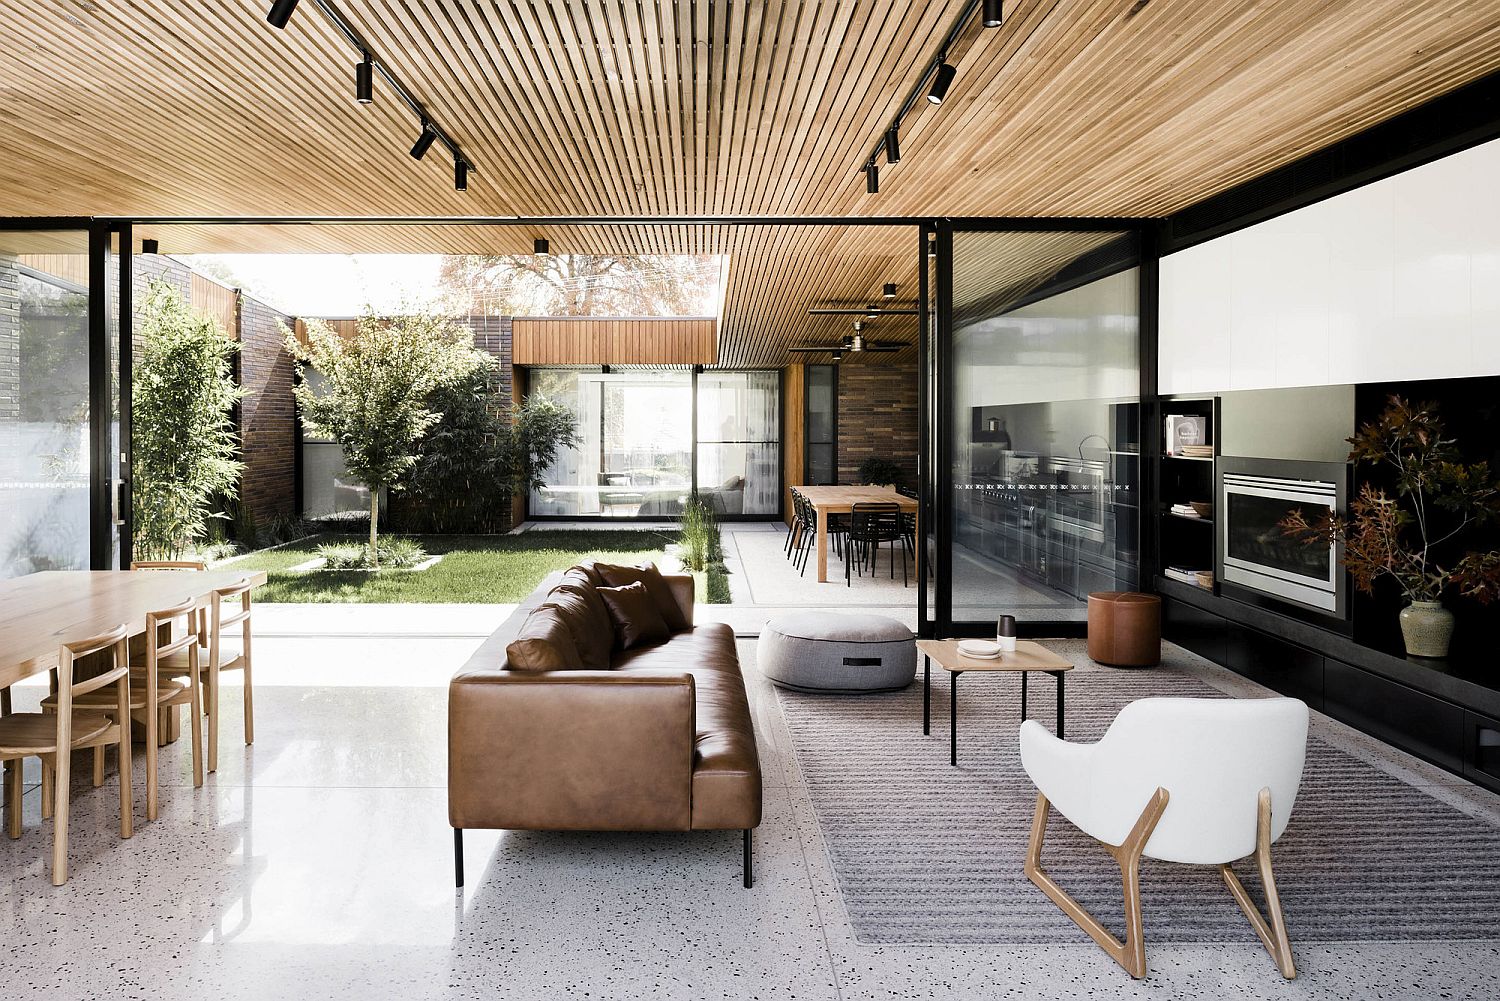 Courtyard-becomes-the-focal-point-of-the-Aussie-home-around-which-other-rooms-are-placed